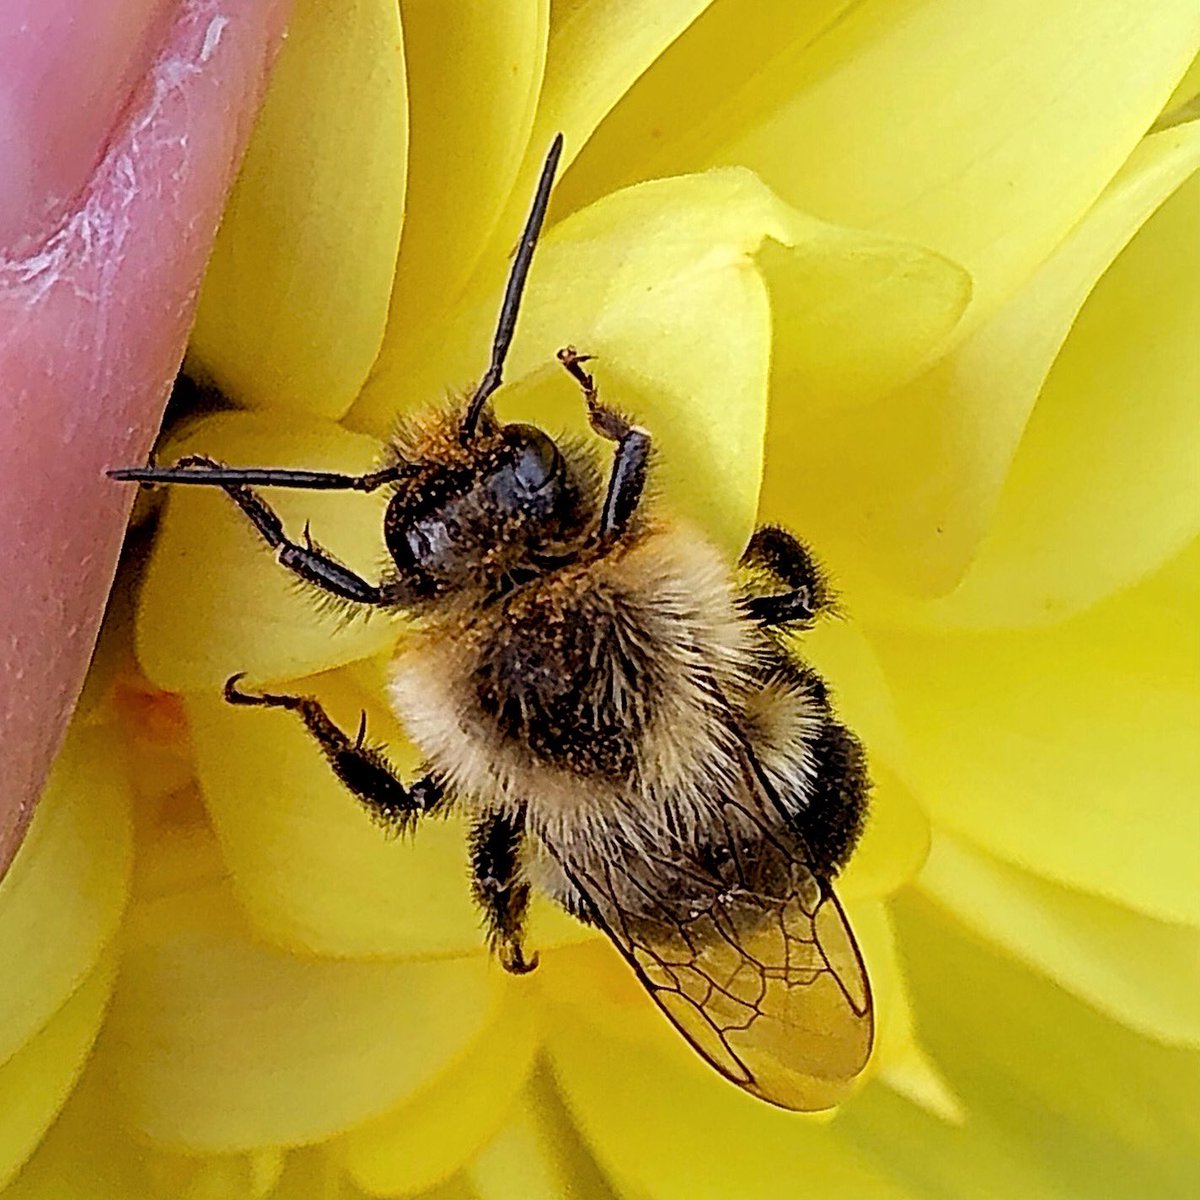 #essentialworker  Male bumble bee on a yellow dahlia. Pollen is good #loishawkey